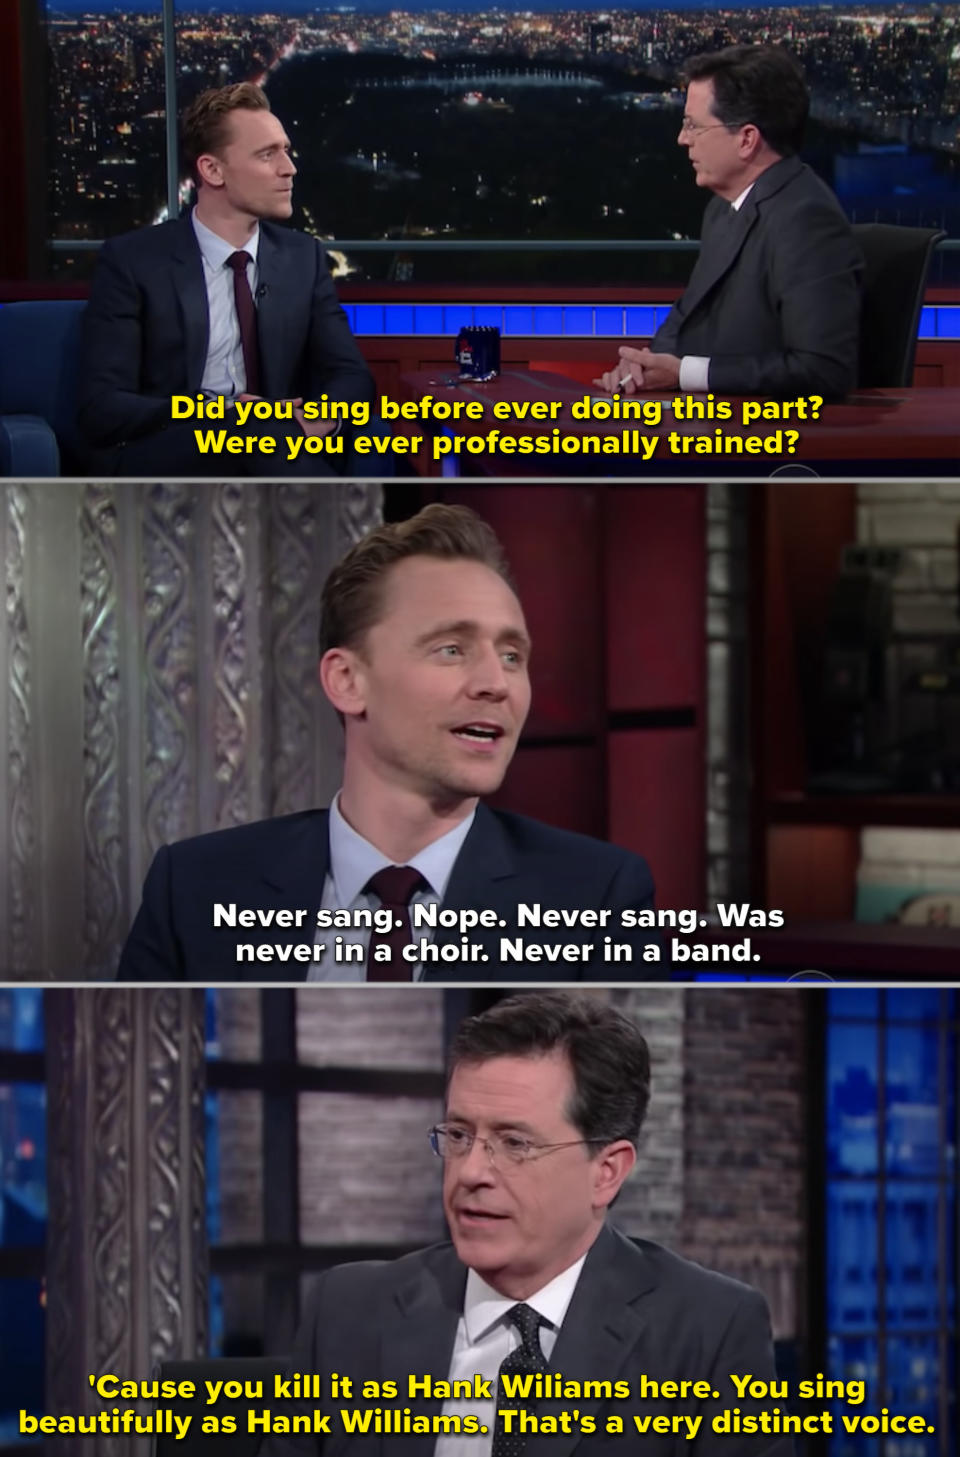 Tom singing with Stephen Colbert on his talk show